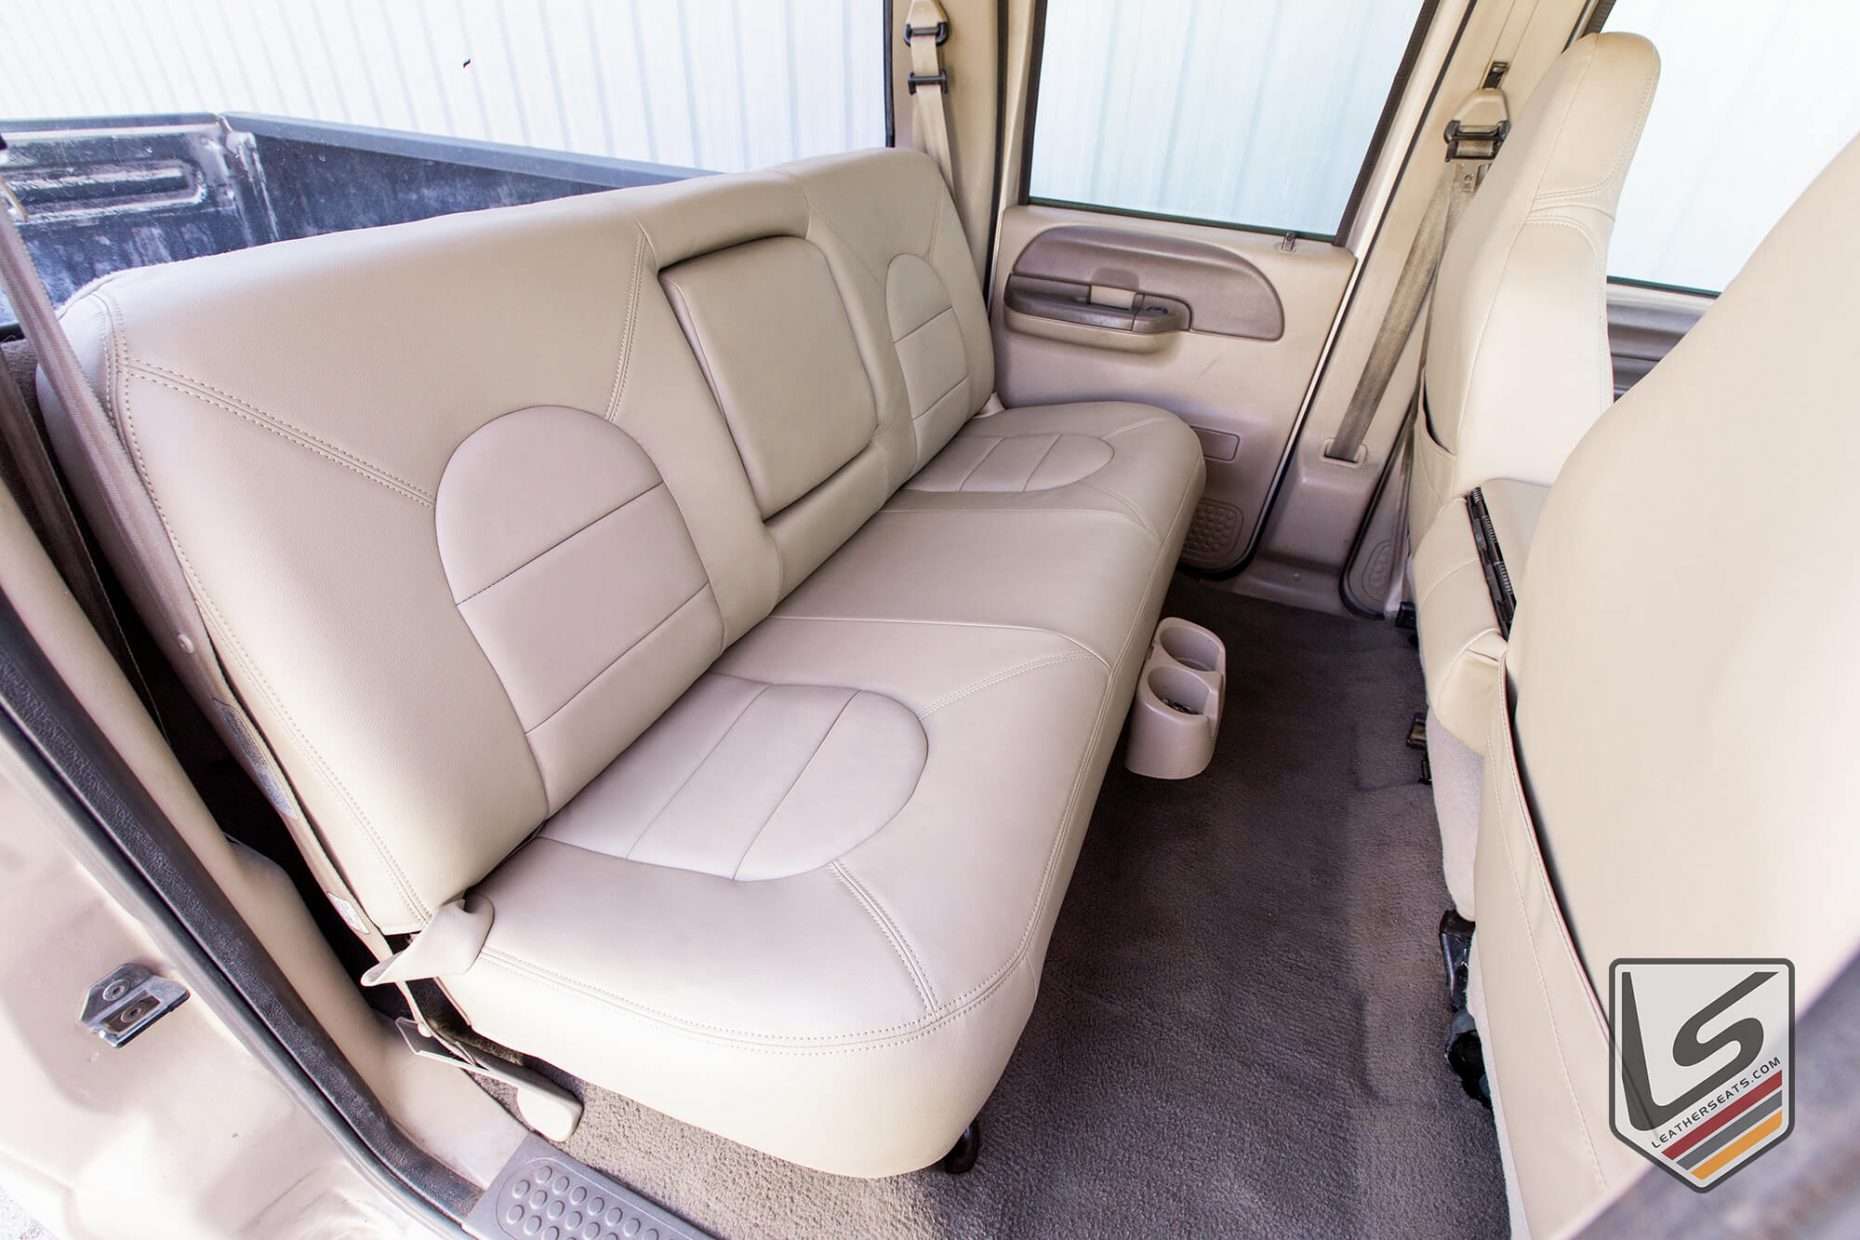 Rear Nutmeg leather seats - Passenger side view